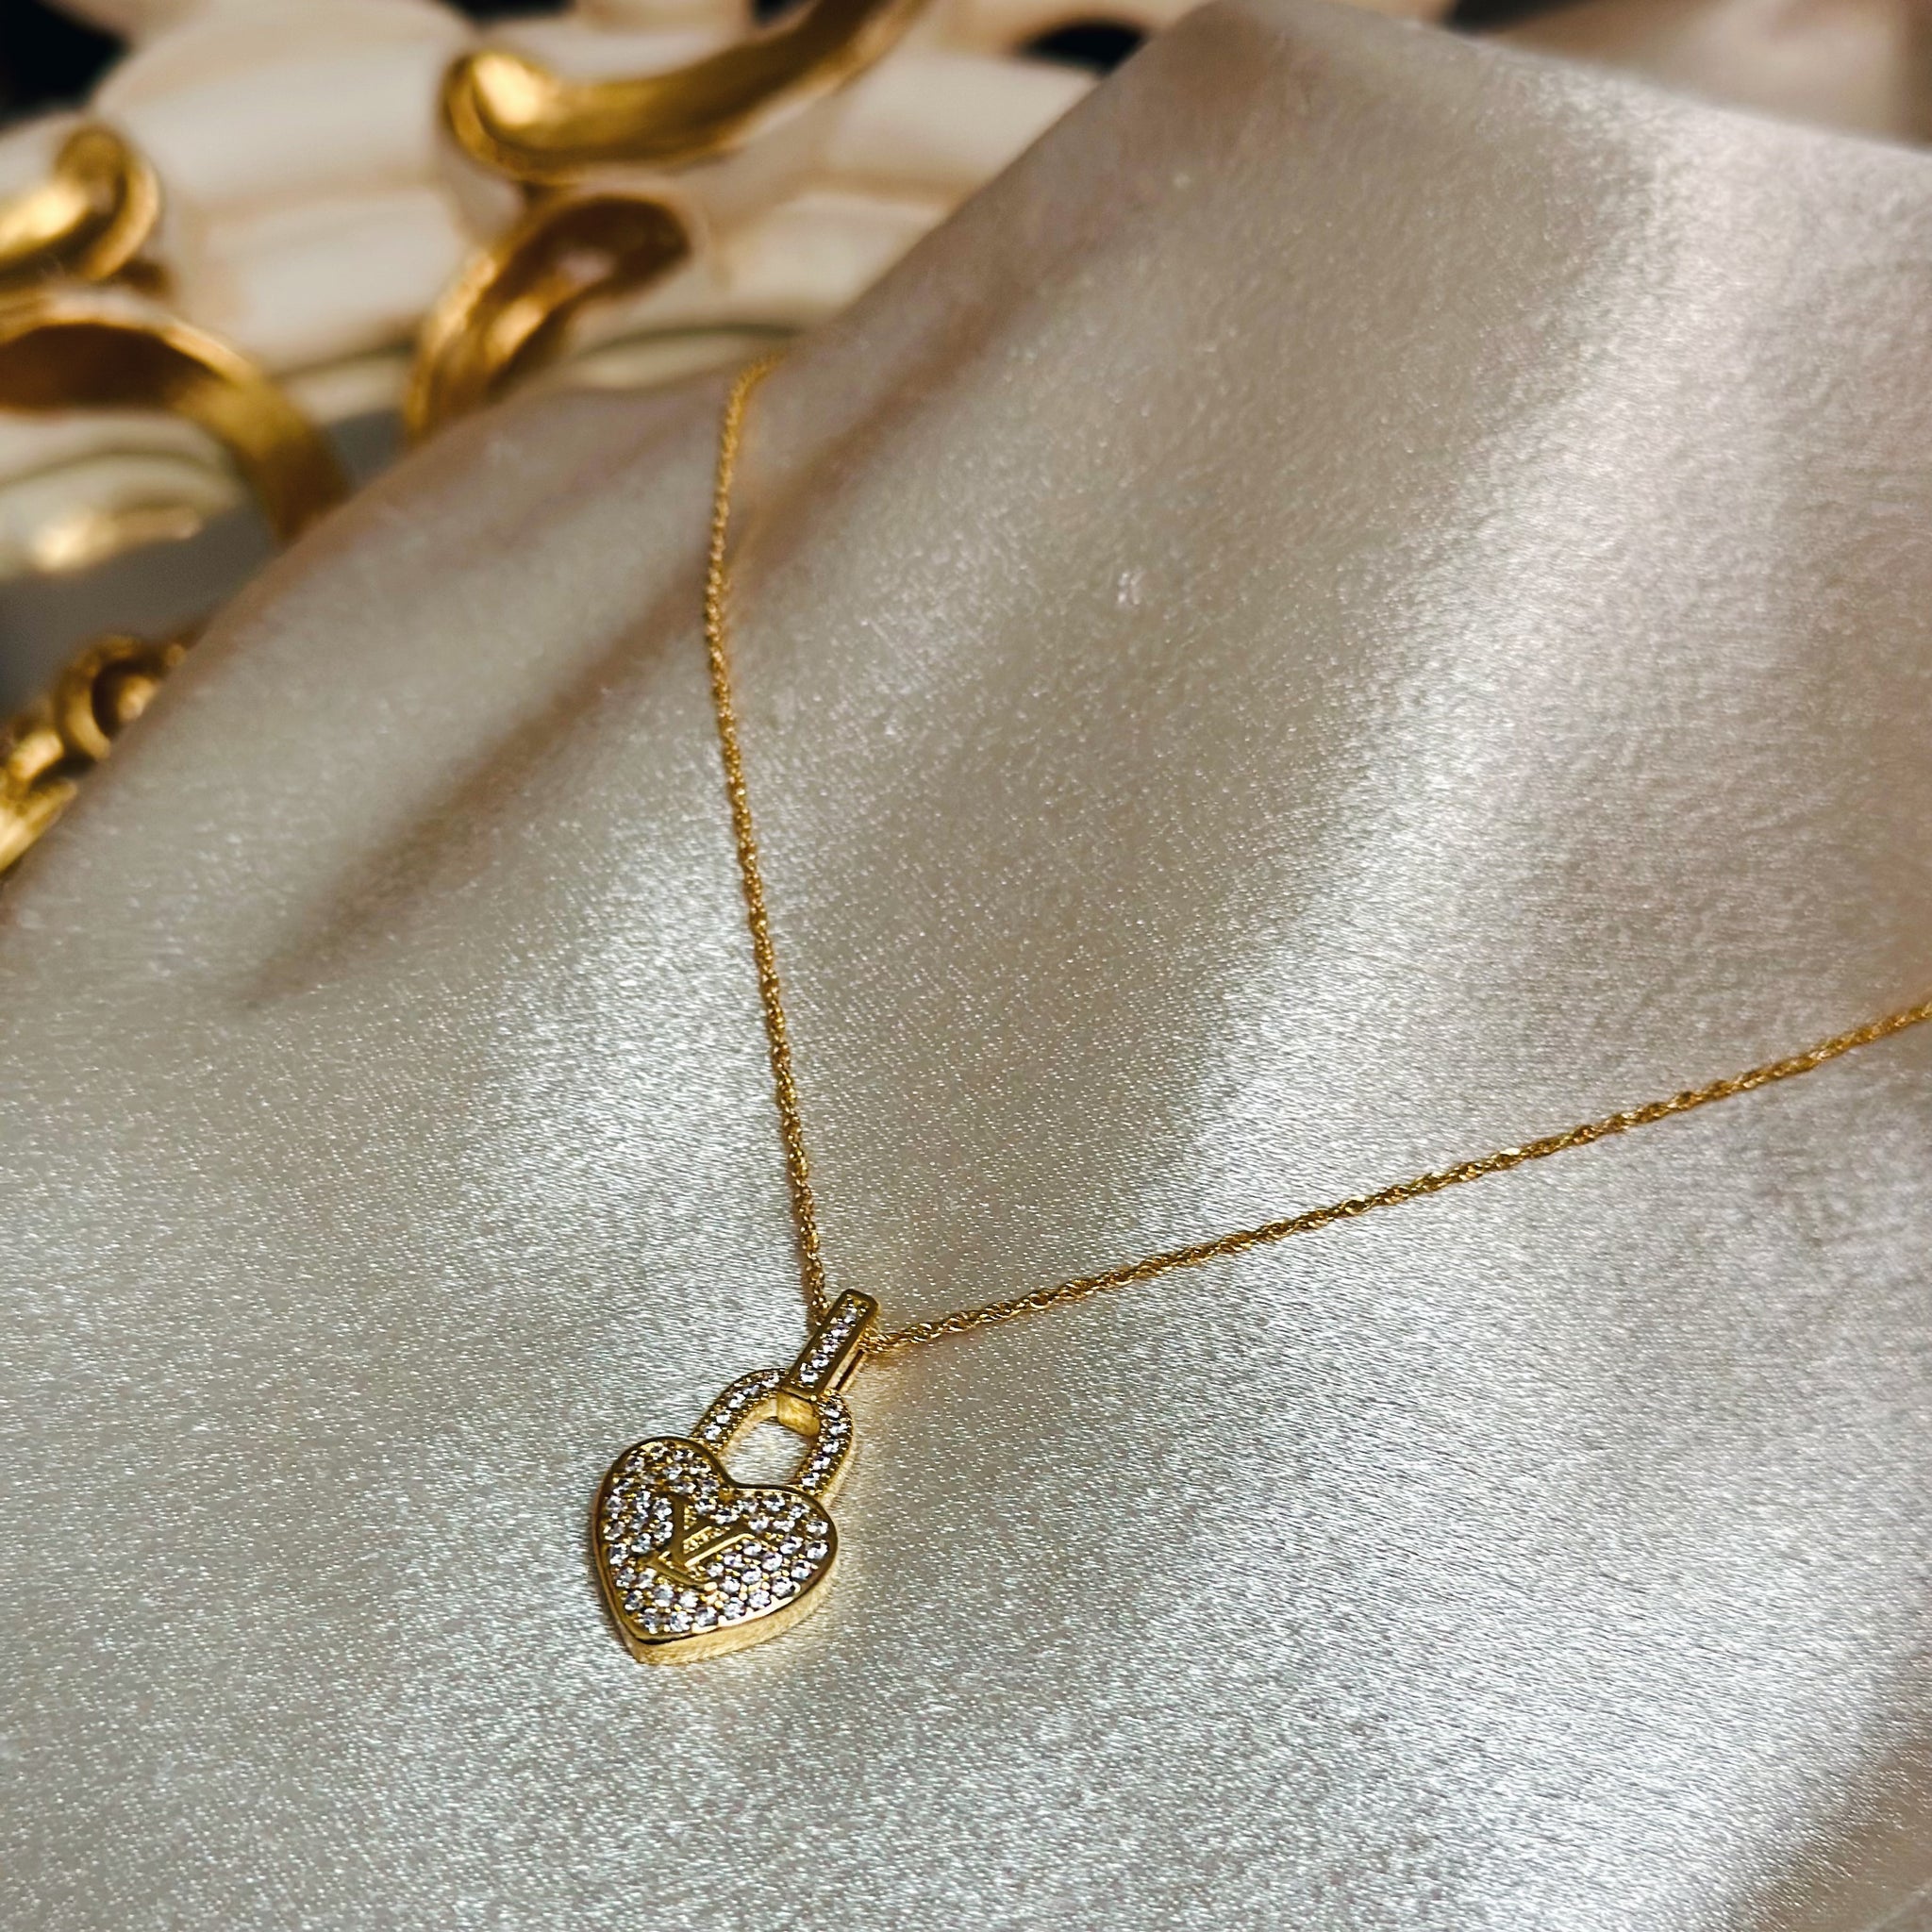 Lv Heart Necklace Gold - $30 - From Danielle